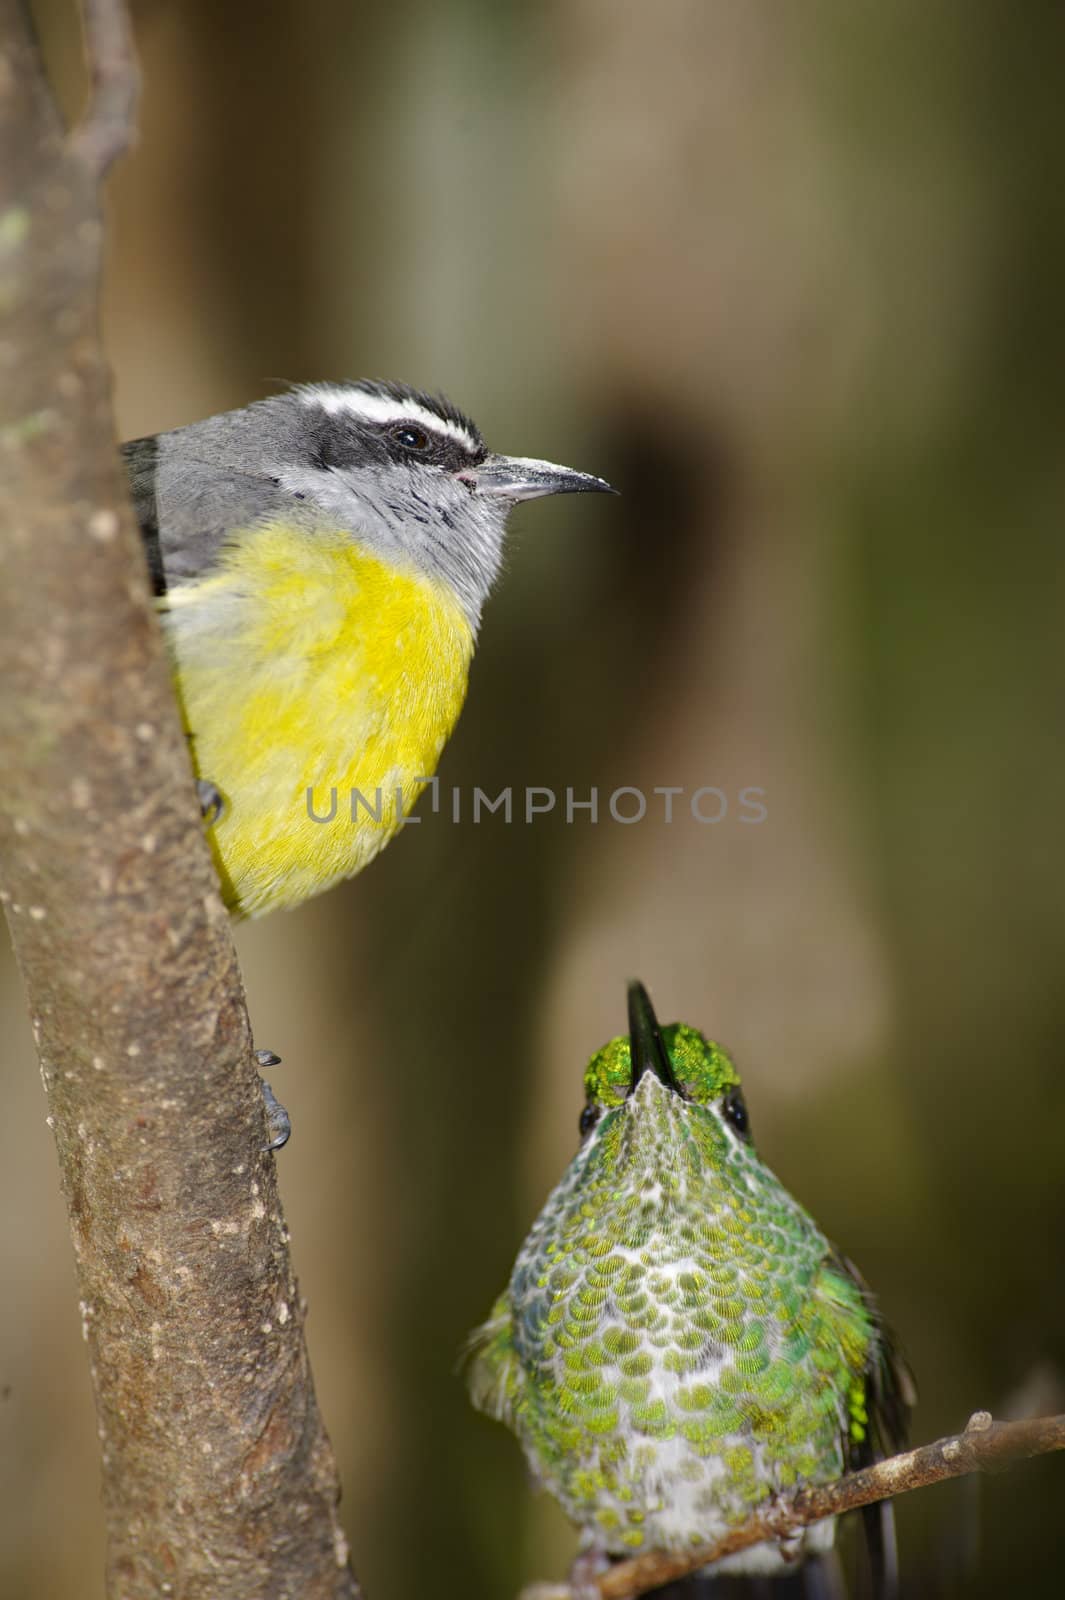 Small hummingbird and Bananaquit resting after feeding, Monteverde Area, Costa Rica.